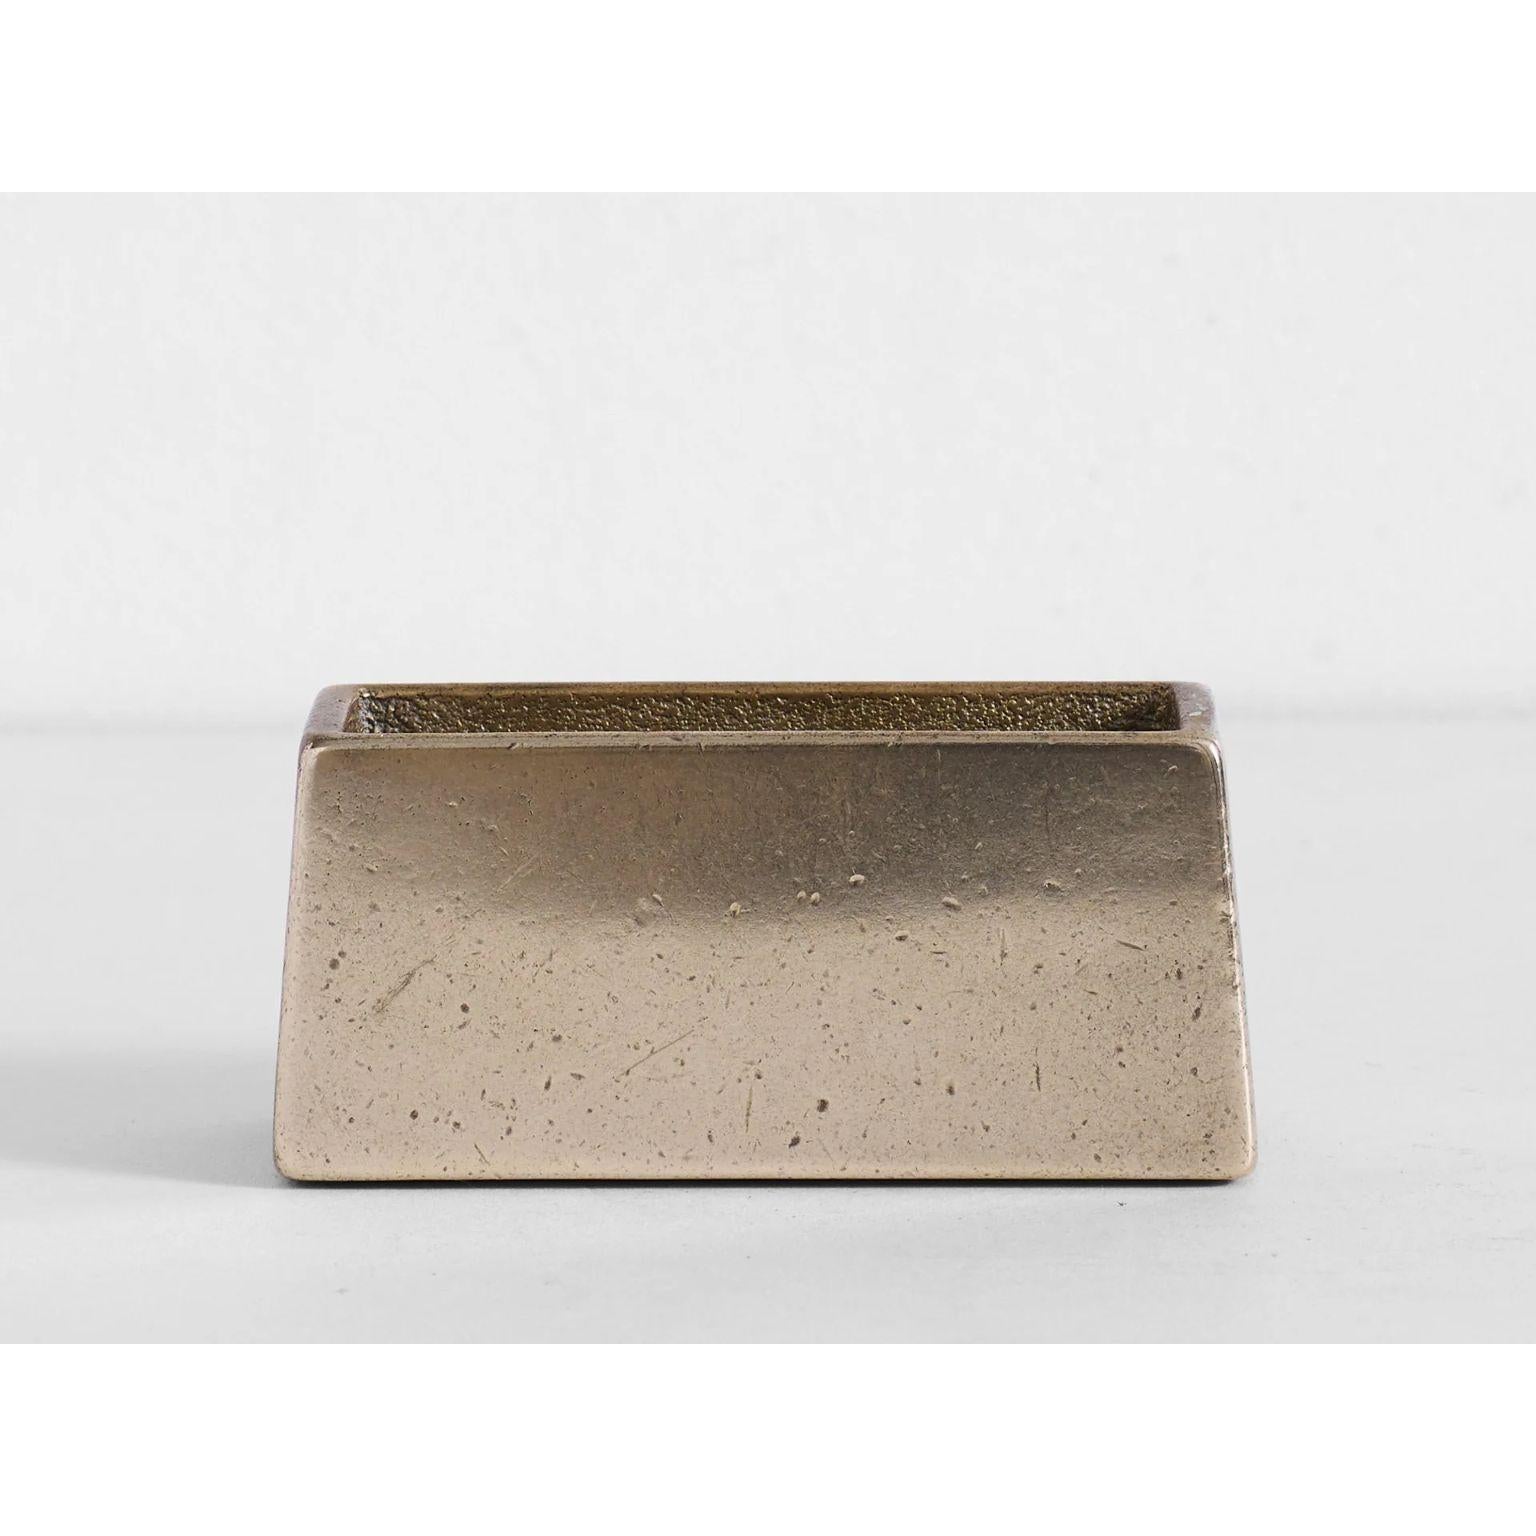 Brass Coaster Holder With Tan Coaster Set by Henry Wilson
Dimensions:  W 11 x D 4 x H 5 cm (Coaster Holder dimensions)
Materials: Solid brass, Leather

Sand cast in solid brass and hand finished.
Holds 6 Tan leather coasters that are included with